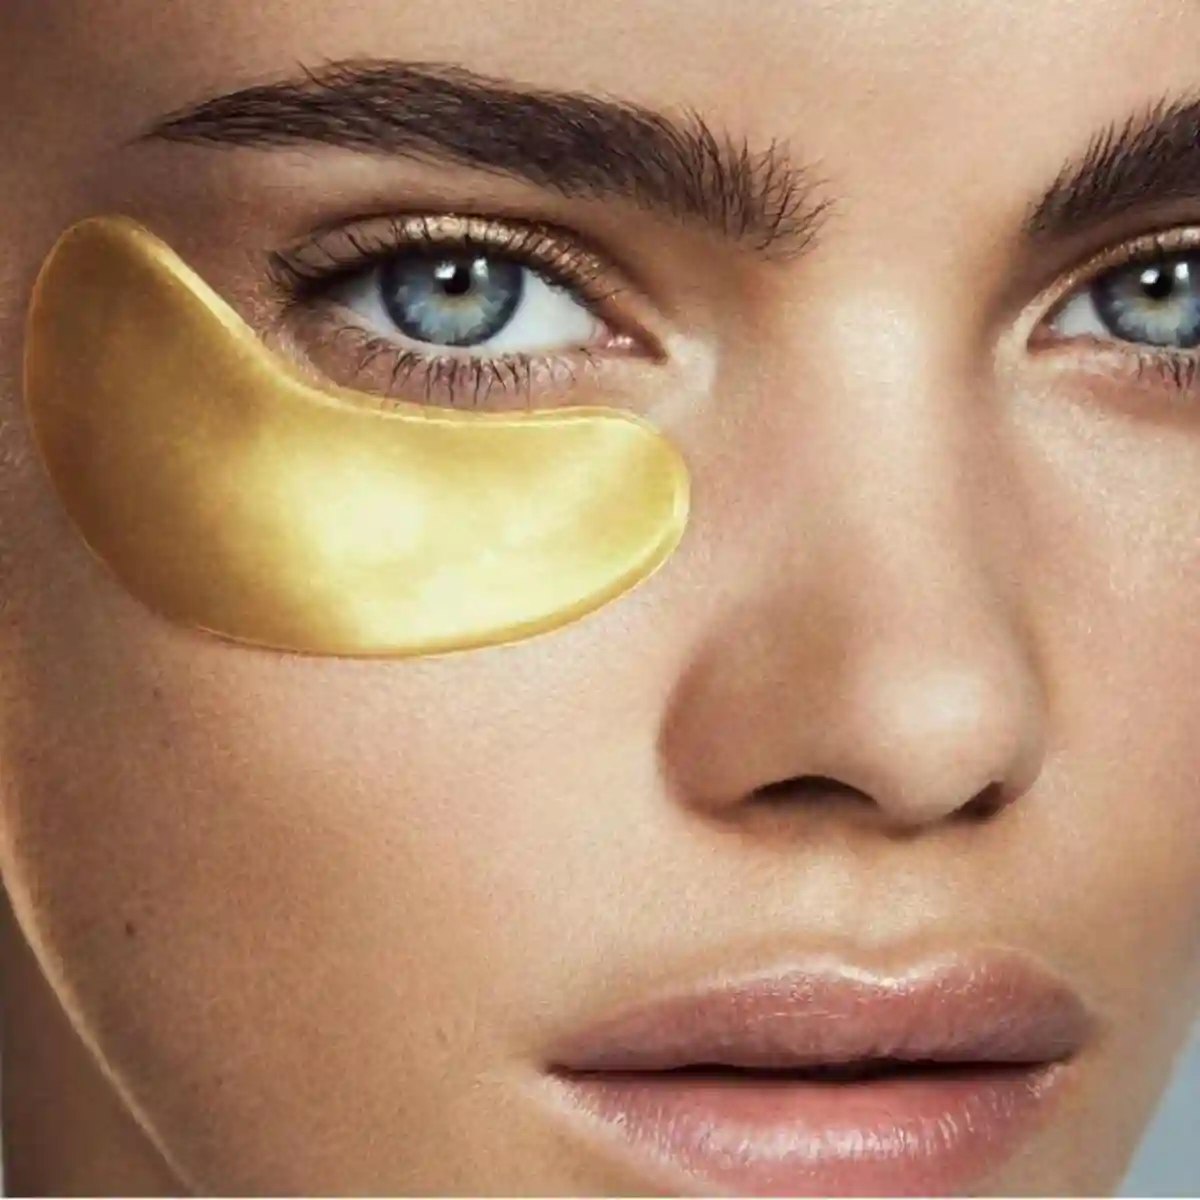 What are the best under-eye patches celebrities use? Benefits & Uses Revealed